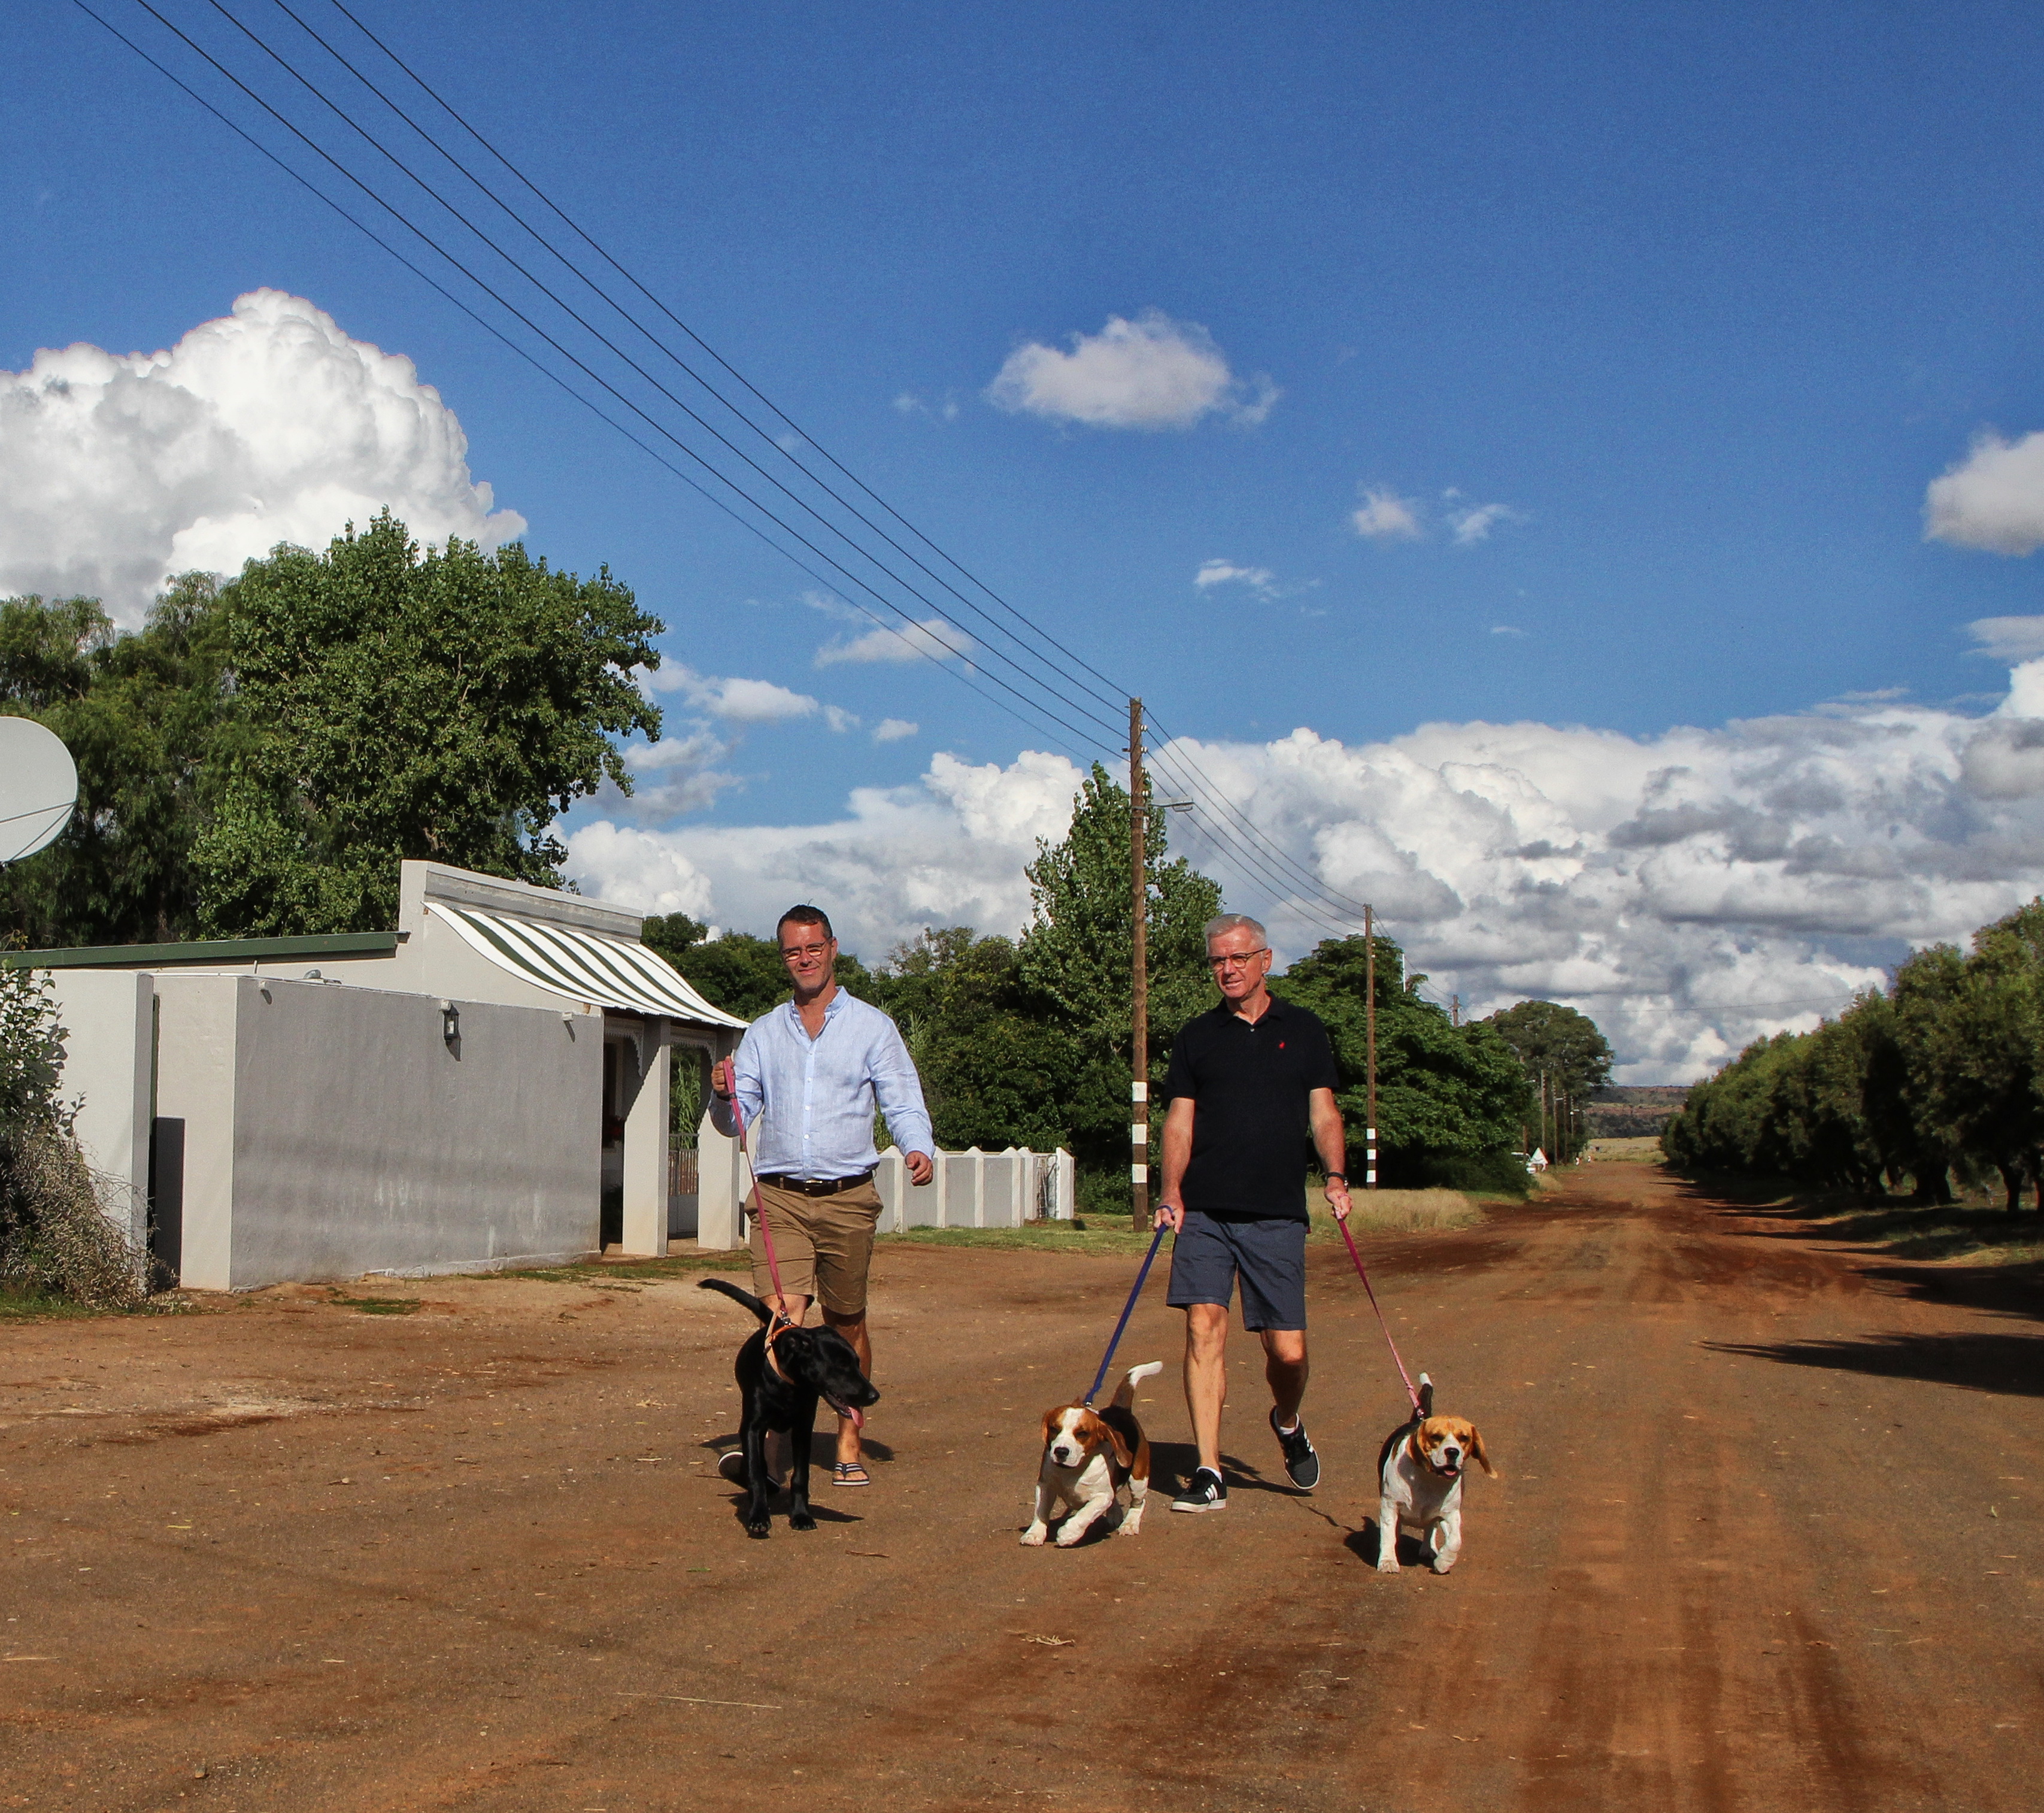 Philippolis, Free State: Never under-estimate the value of being able to walk your dogs on a dirt road under open skies. Image: Chris Marais